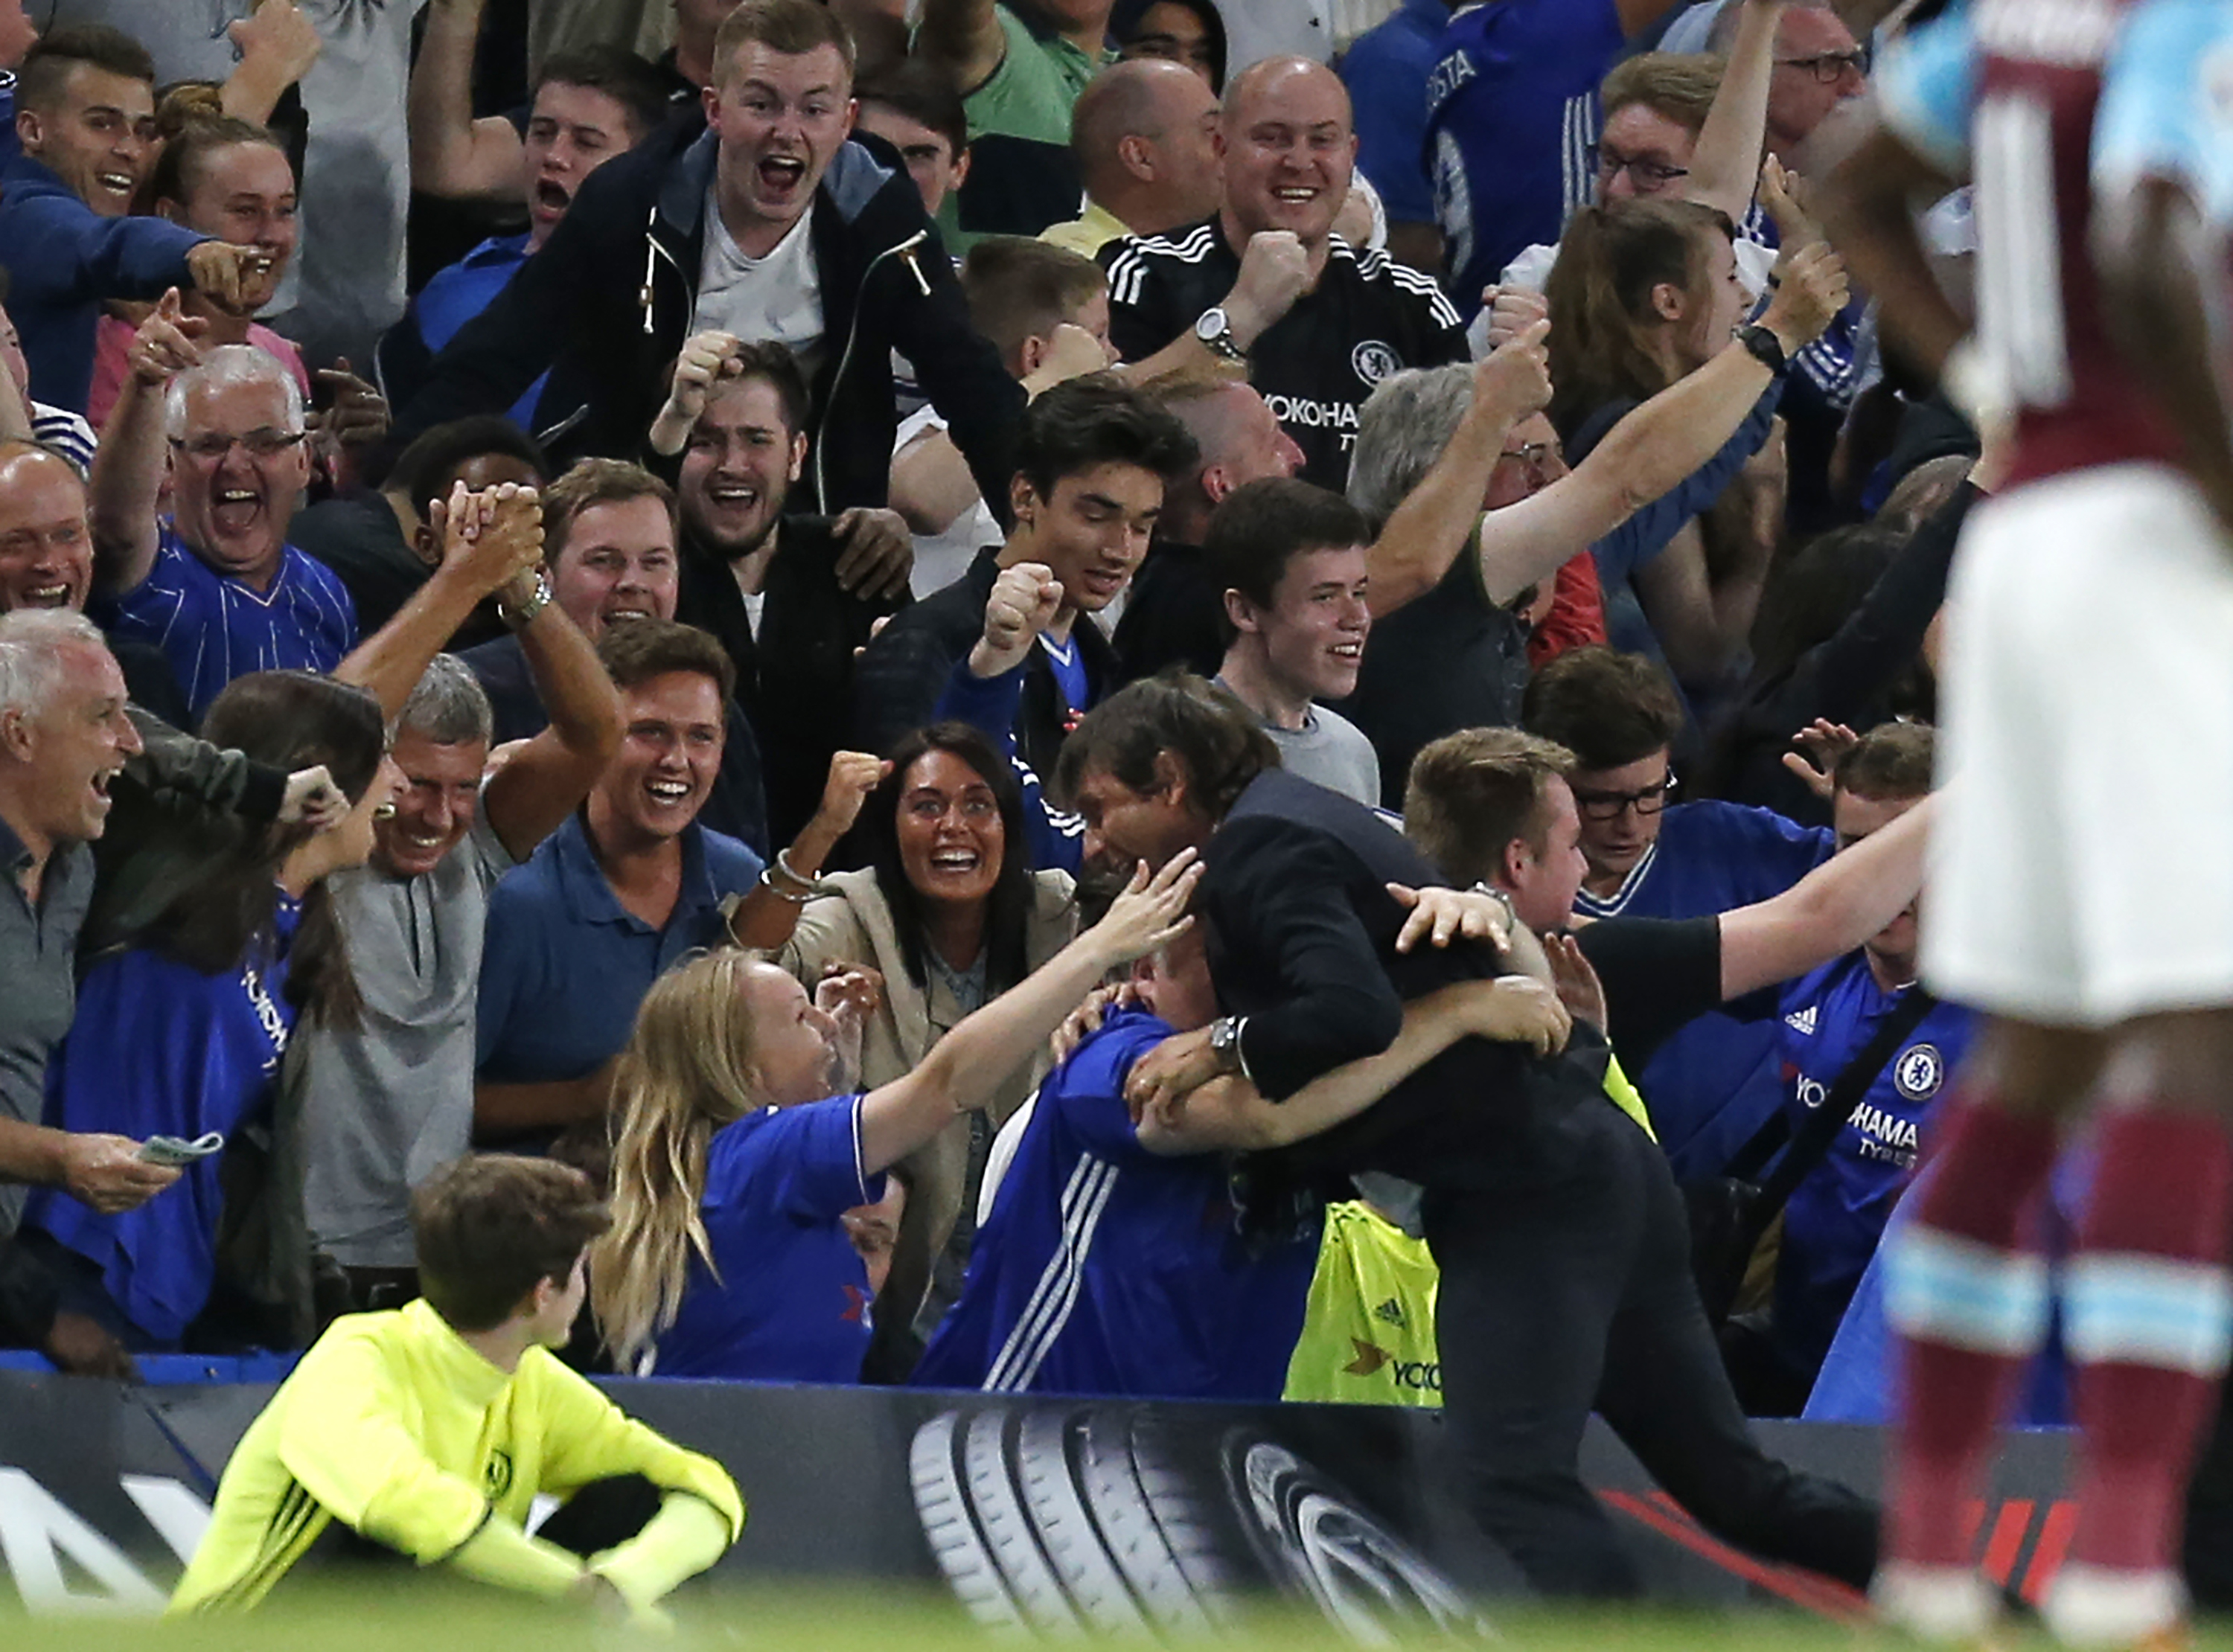 Chelsea's Italian head coach Antonio Conte celebrates with supporters after Chelsea's Brazilian-born Spanish striker Diego Costa scores their late winning goal during the English Premier League football match between Chelsea and West Ham United at Stamford Bridge in London on August 15, 2016. Chelsea won the game 2-1. / AFP / Ian KINGTON / RESTRICTED TO EDITORIAL USE. No use with unauthorized audio, video, data, fixture lists, club/league logos or 'live' services. Online in-match use limited to 75 images, no video emulation. No use in betting, games or single club/league/player publications. / (Photo credit should read IAN KINGTON/AFP/Getty Images)